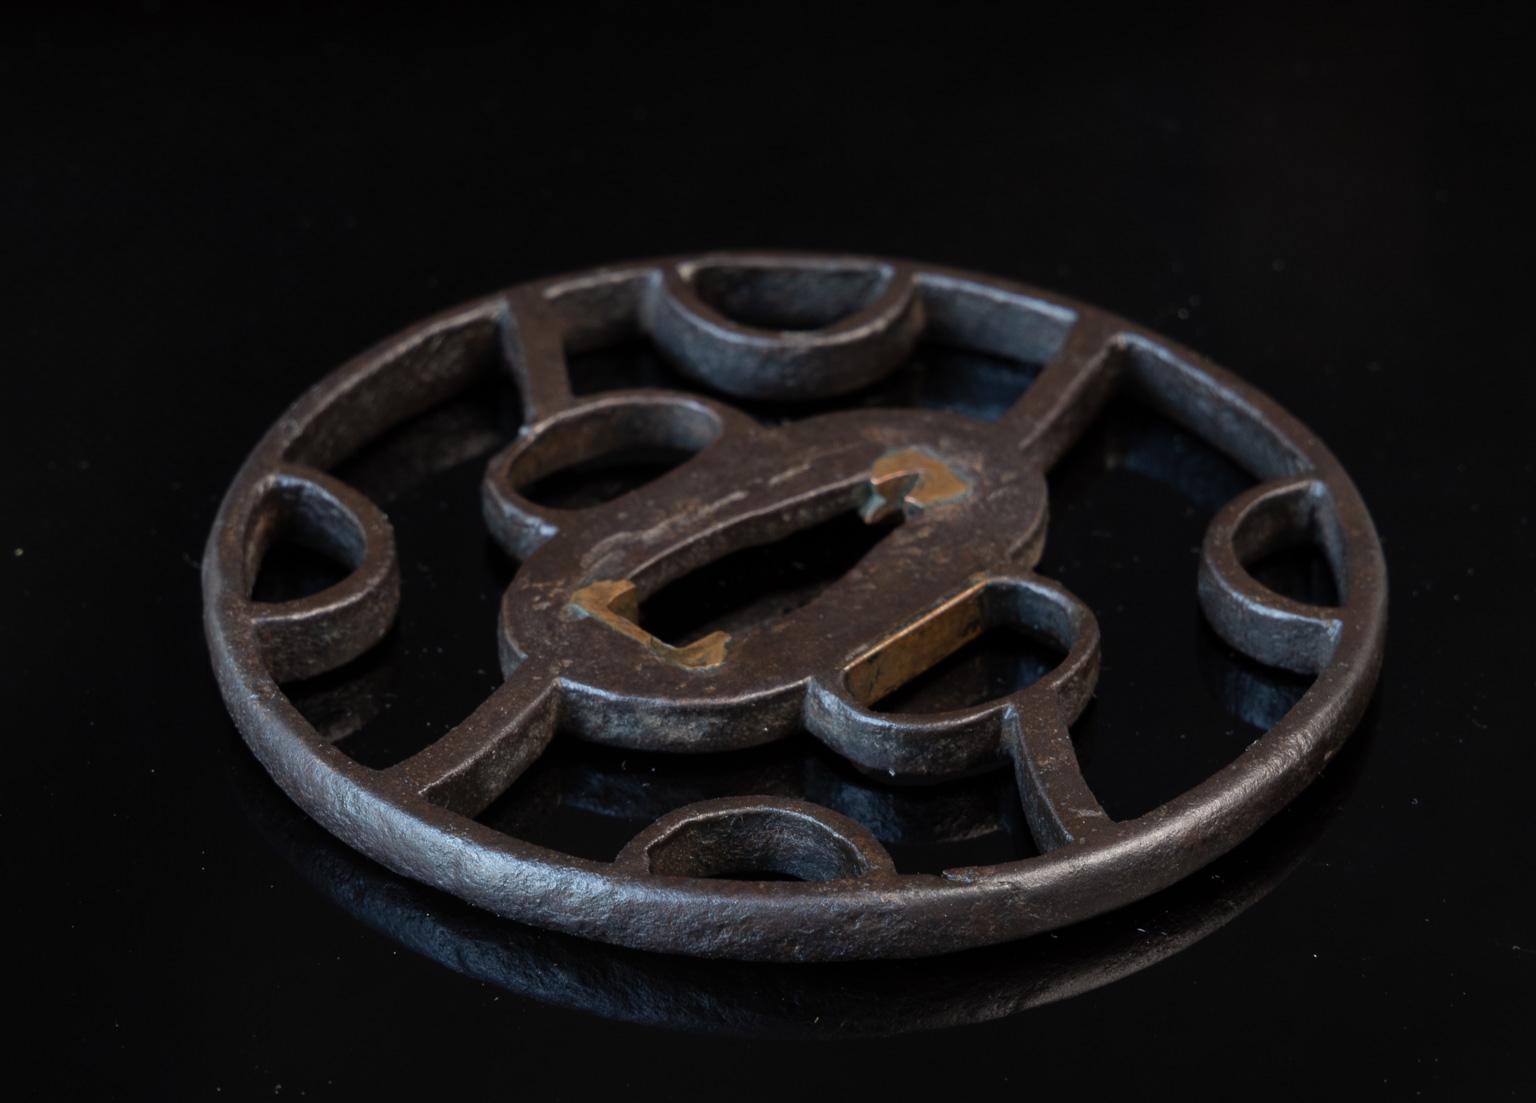 Marugata, diameter: 8 cm; thickness 5 mm 

Certification: the tsuba comes with a Tokubetsu Hozon Tosogu certificate issued by the NBTHK. 

 

The tsuba shows a unique yet simple and strong design. The patina is excellent and tekkotsu is